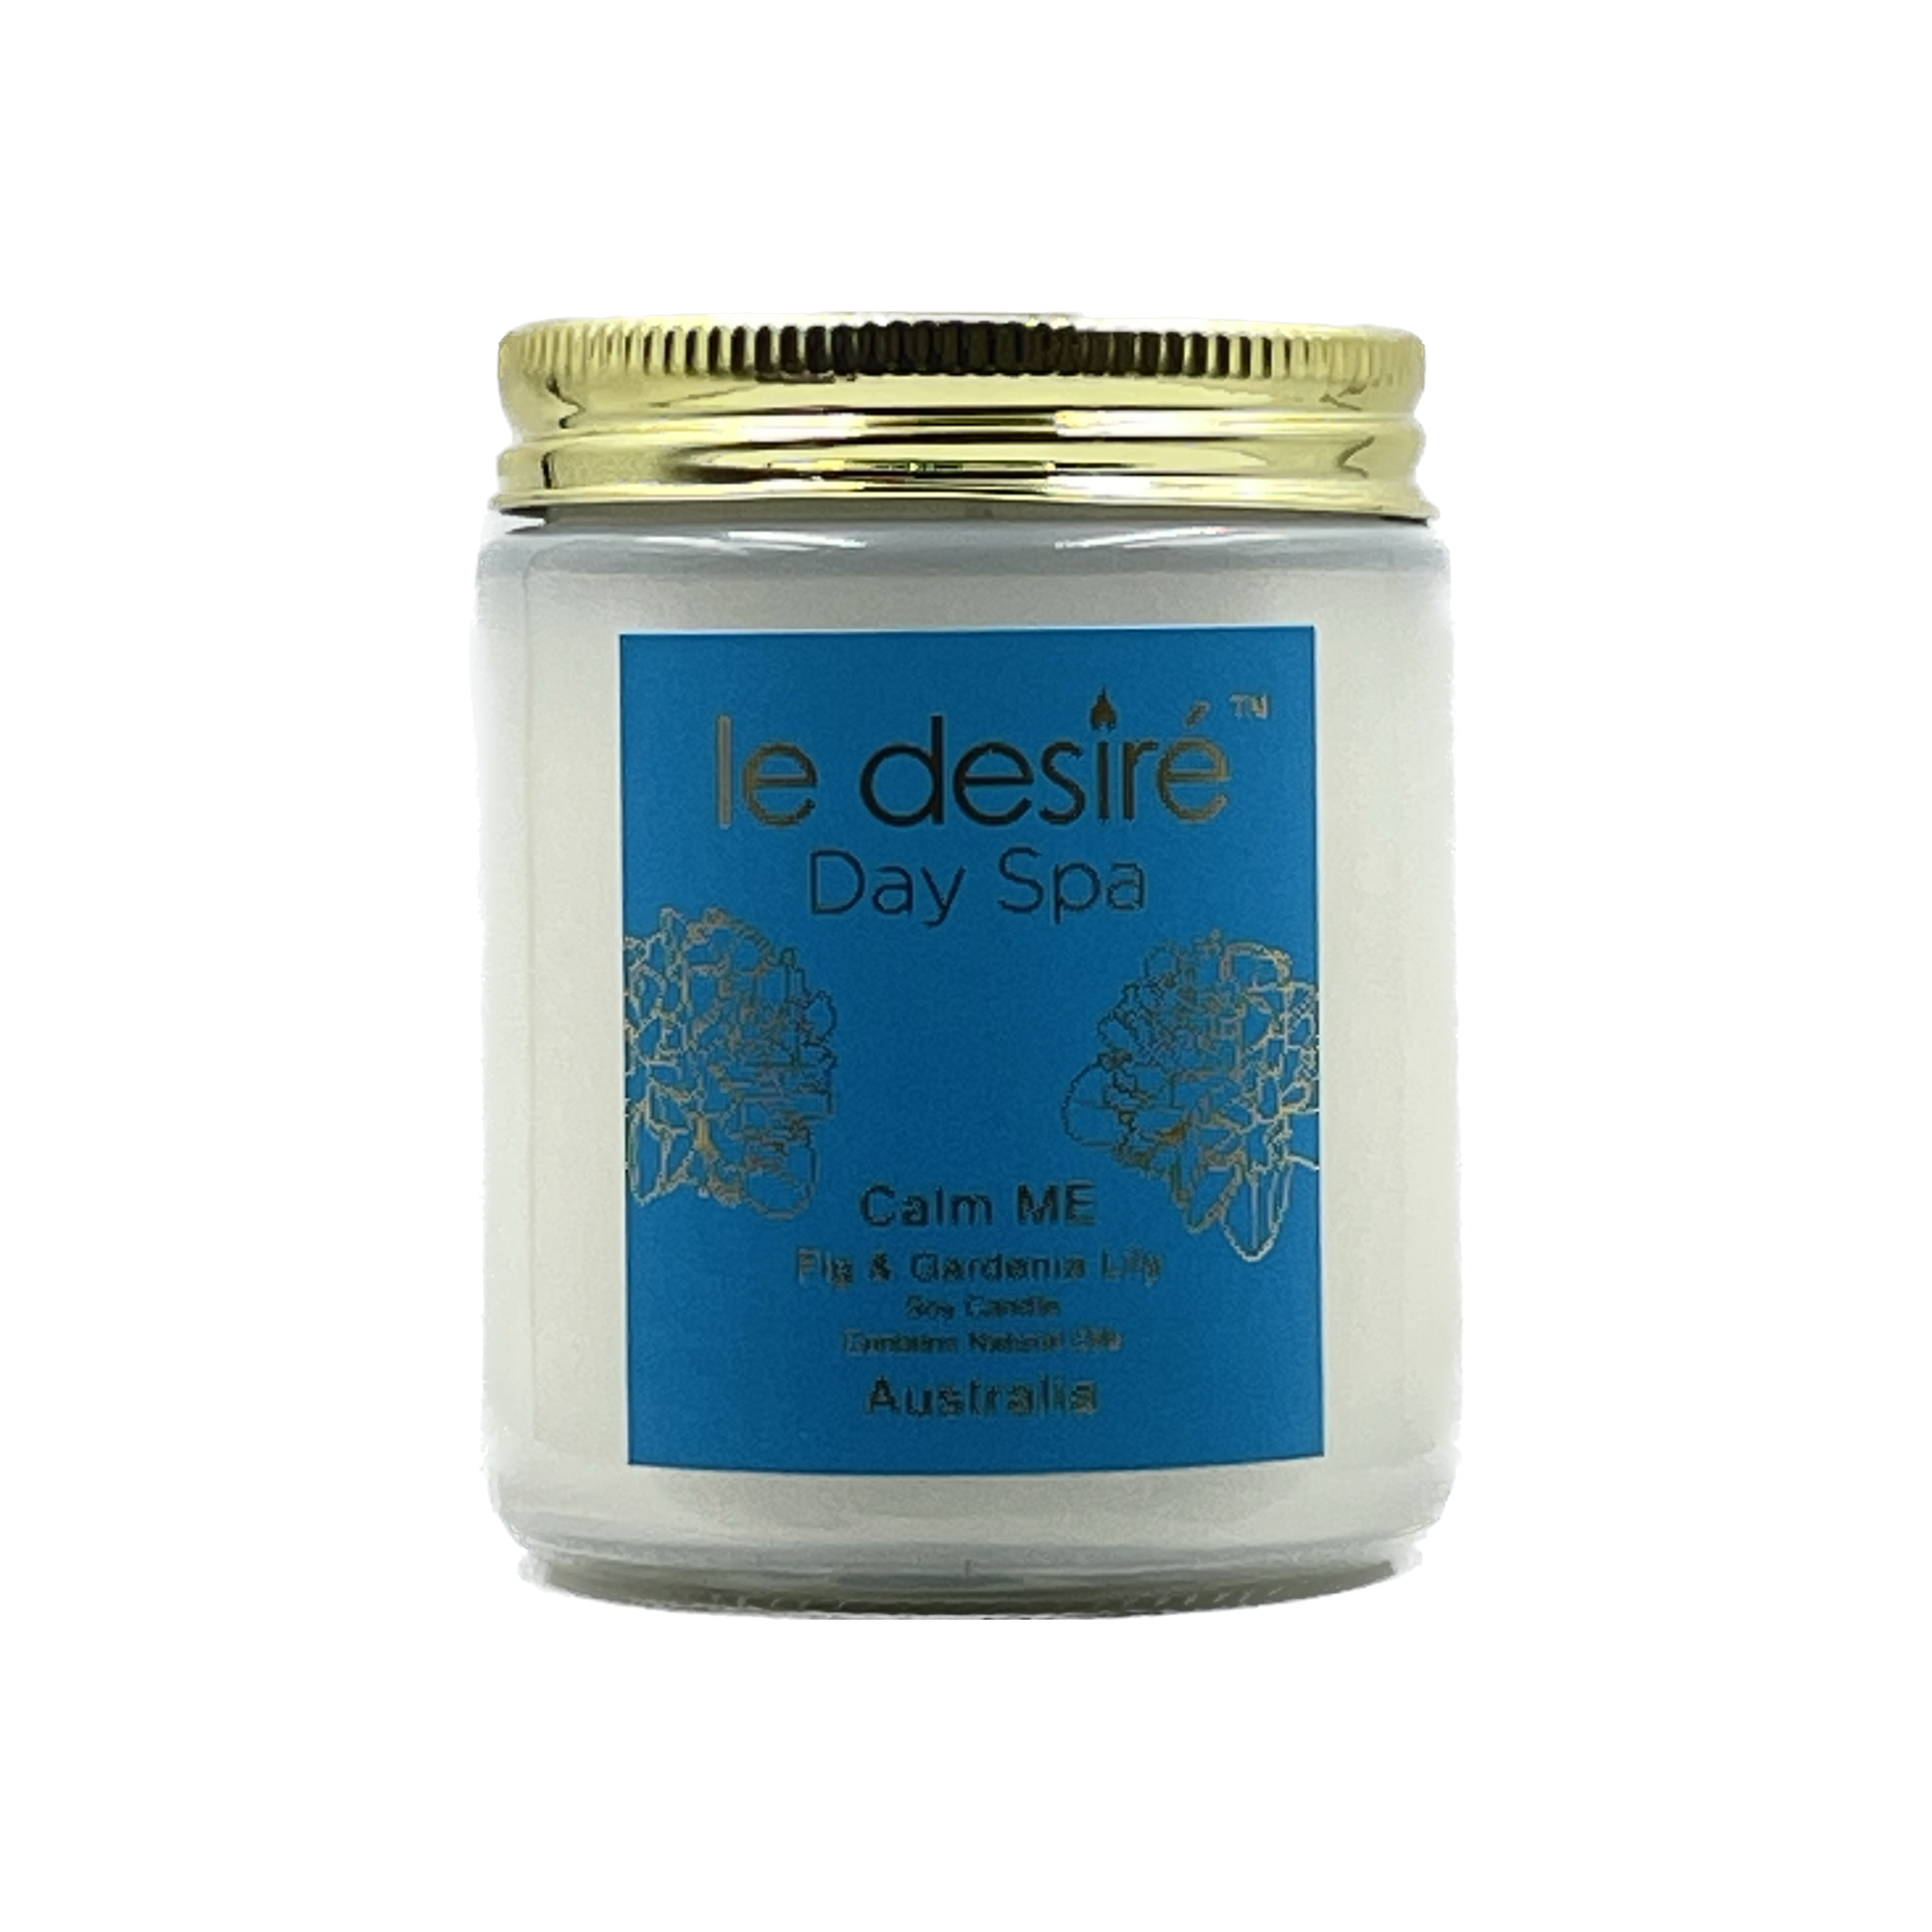 Calm ME (Fig & Gardenia Lily) - Day Spa Soy Candle